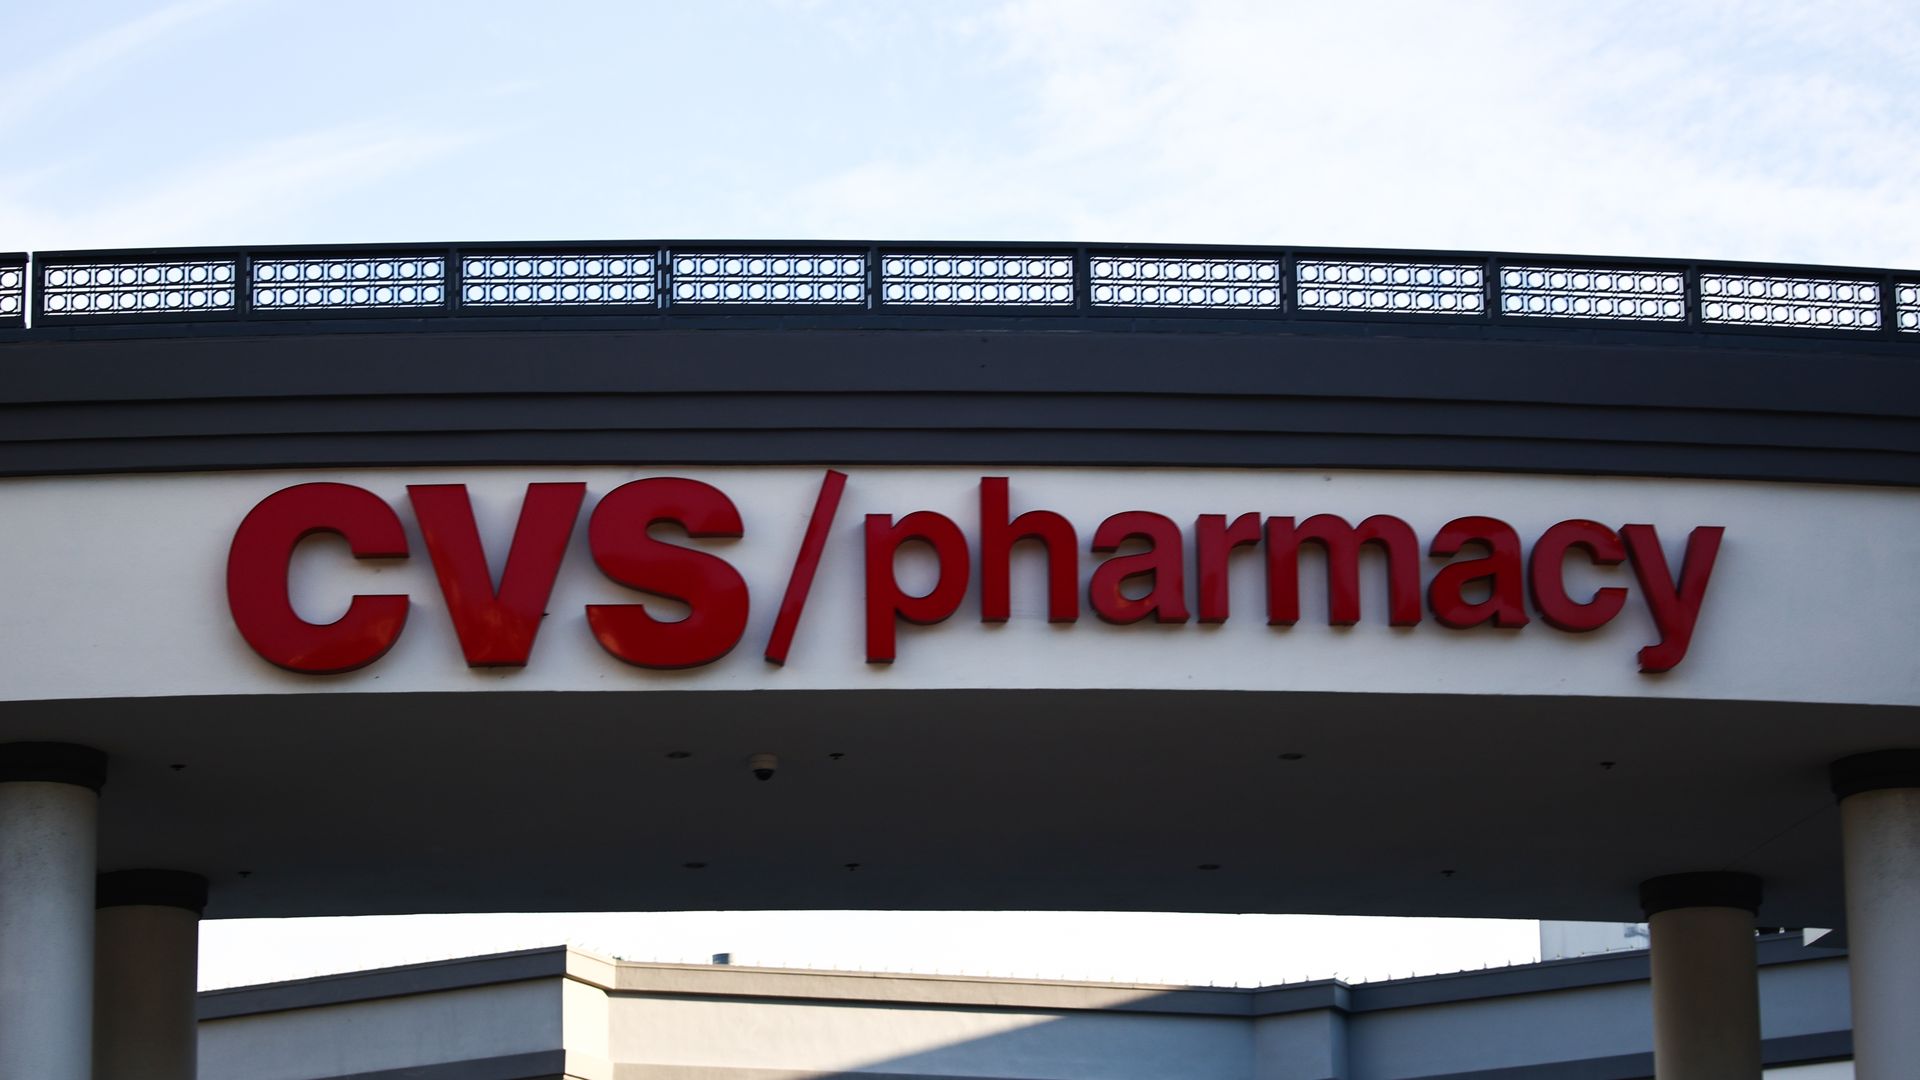 A photo of the CVS Pharmacy sign outdoors with clouds in the background